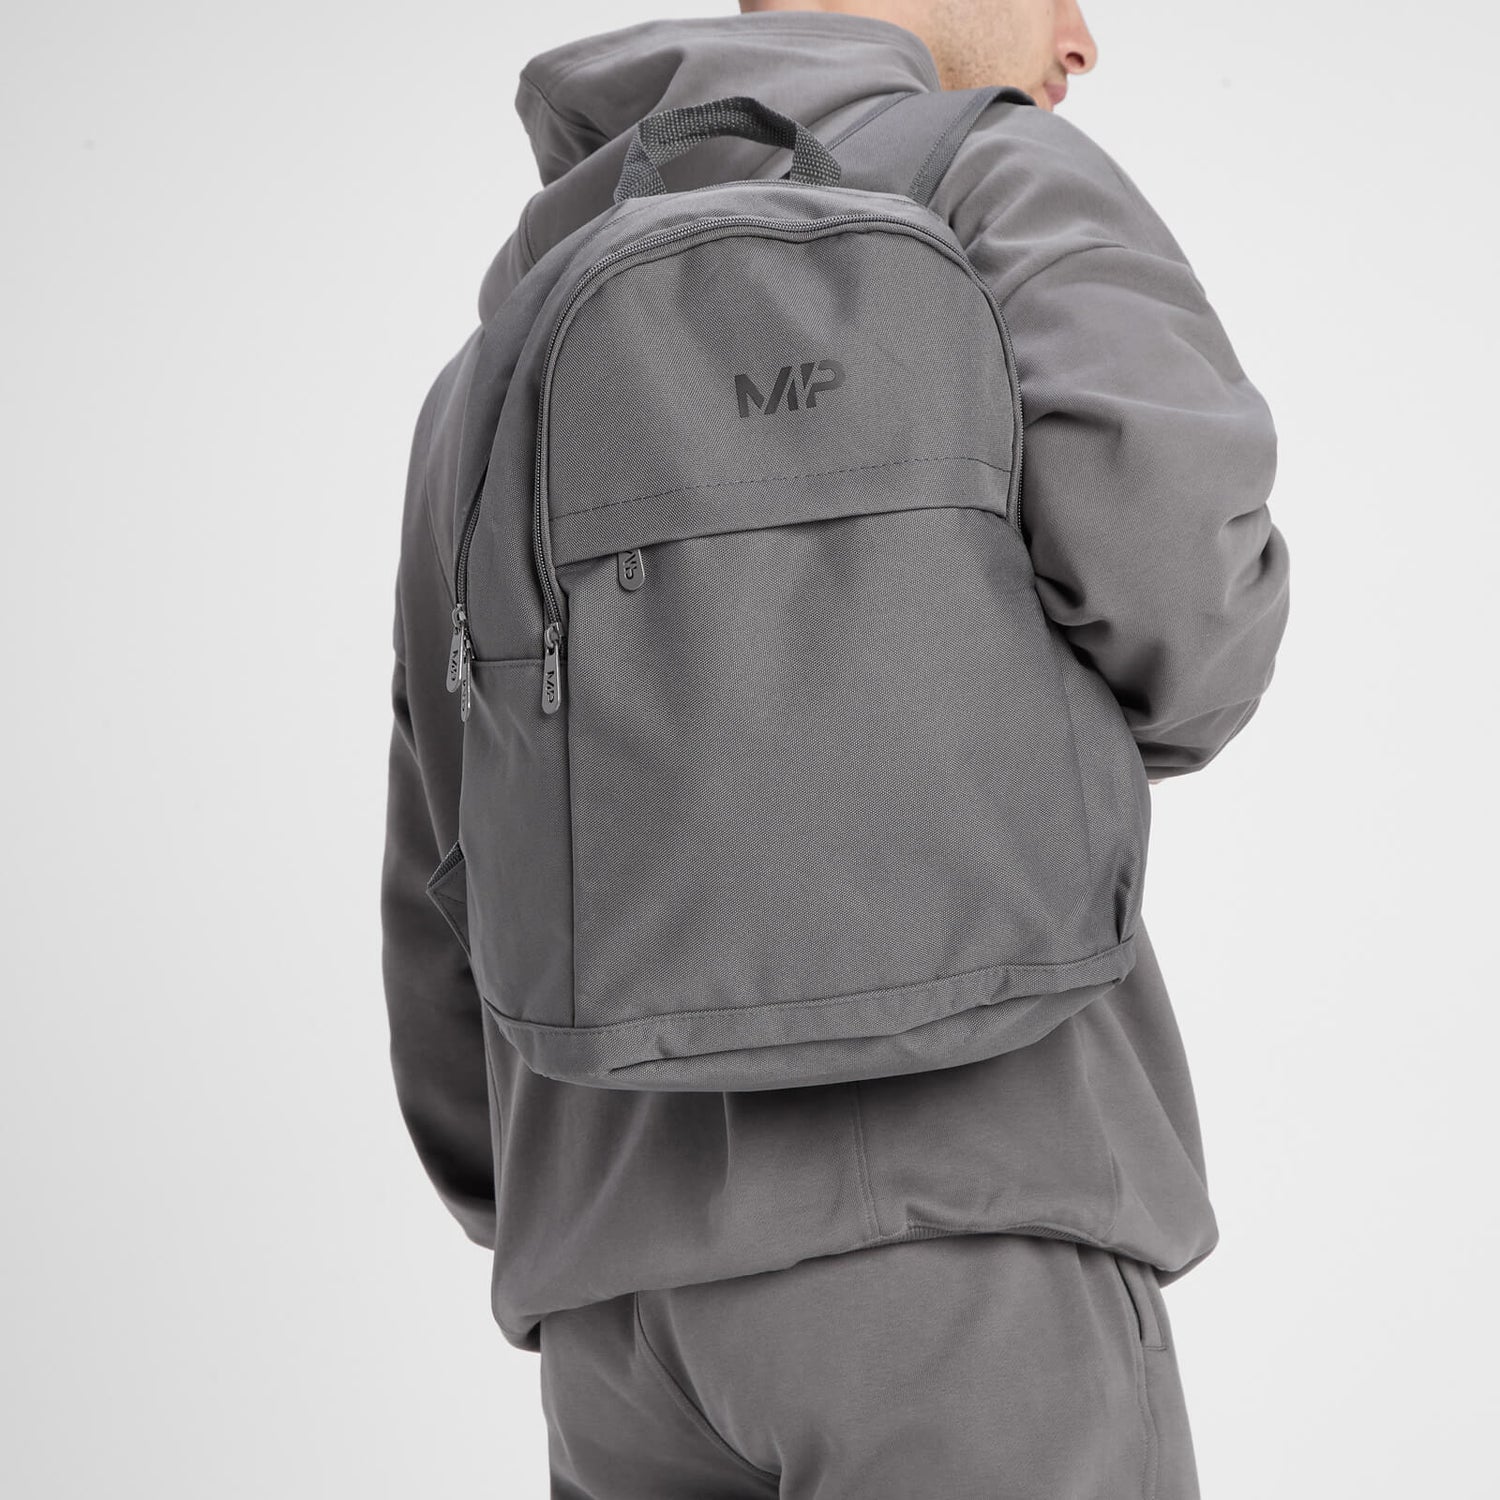 MP Backpack – Carbon